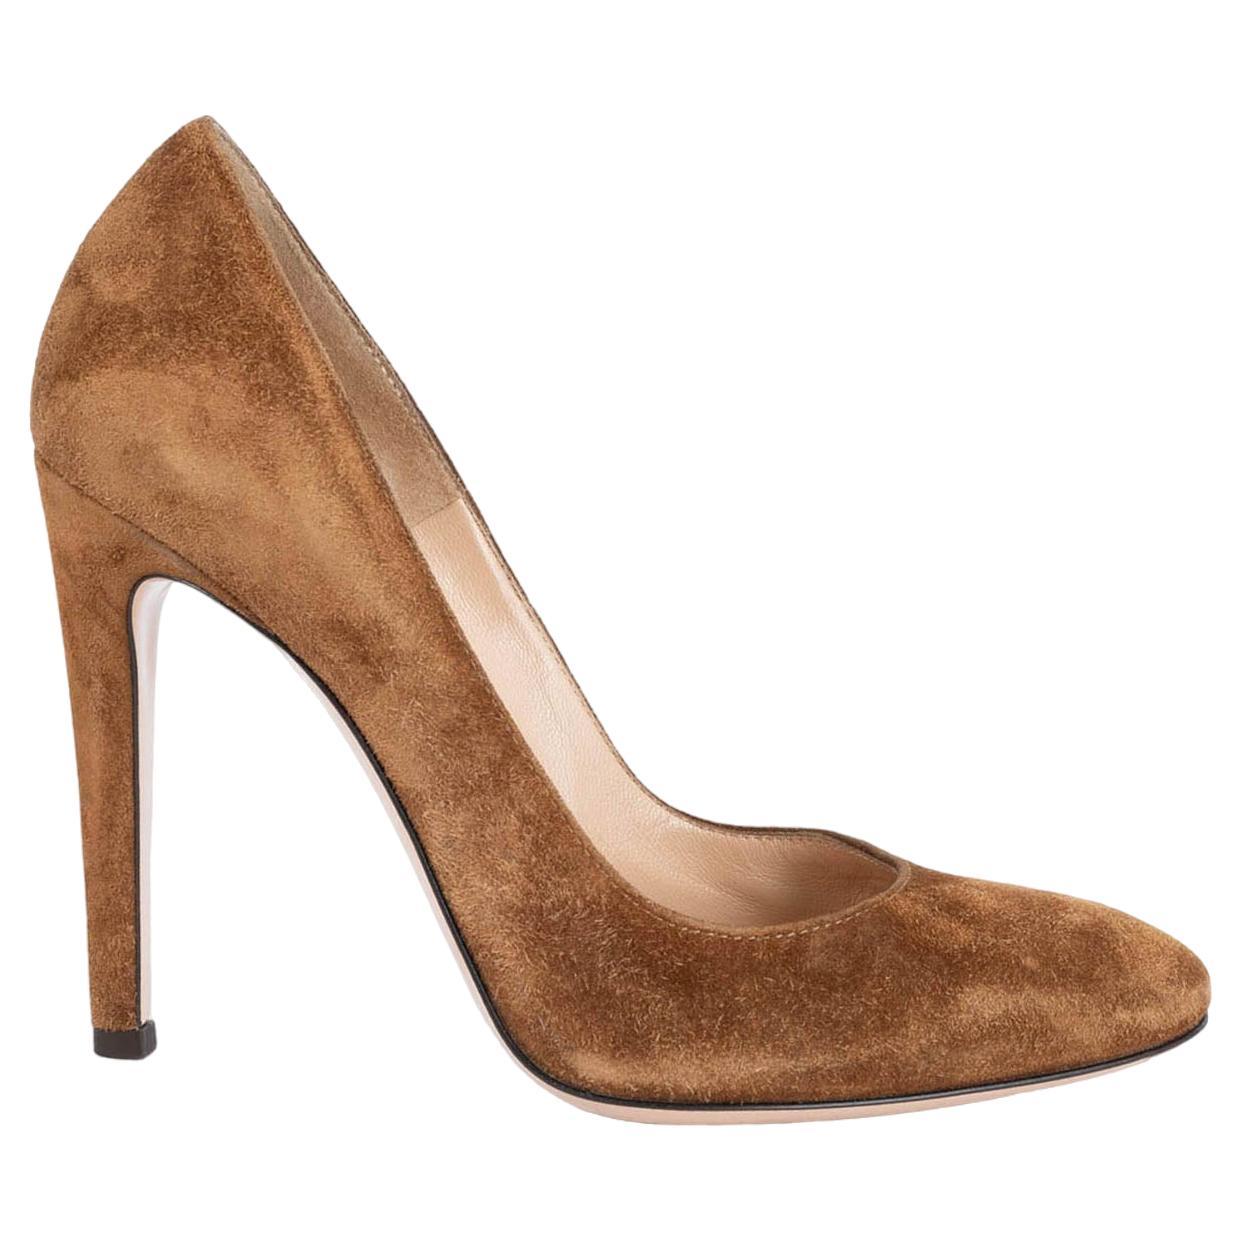 GIANVITO ROSSI cinnamon brown suede ROMA Pumps Shoes 36.5 For Sale